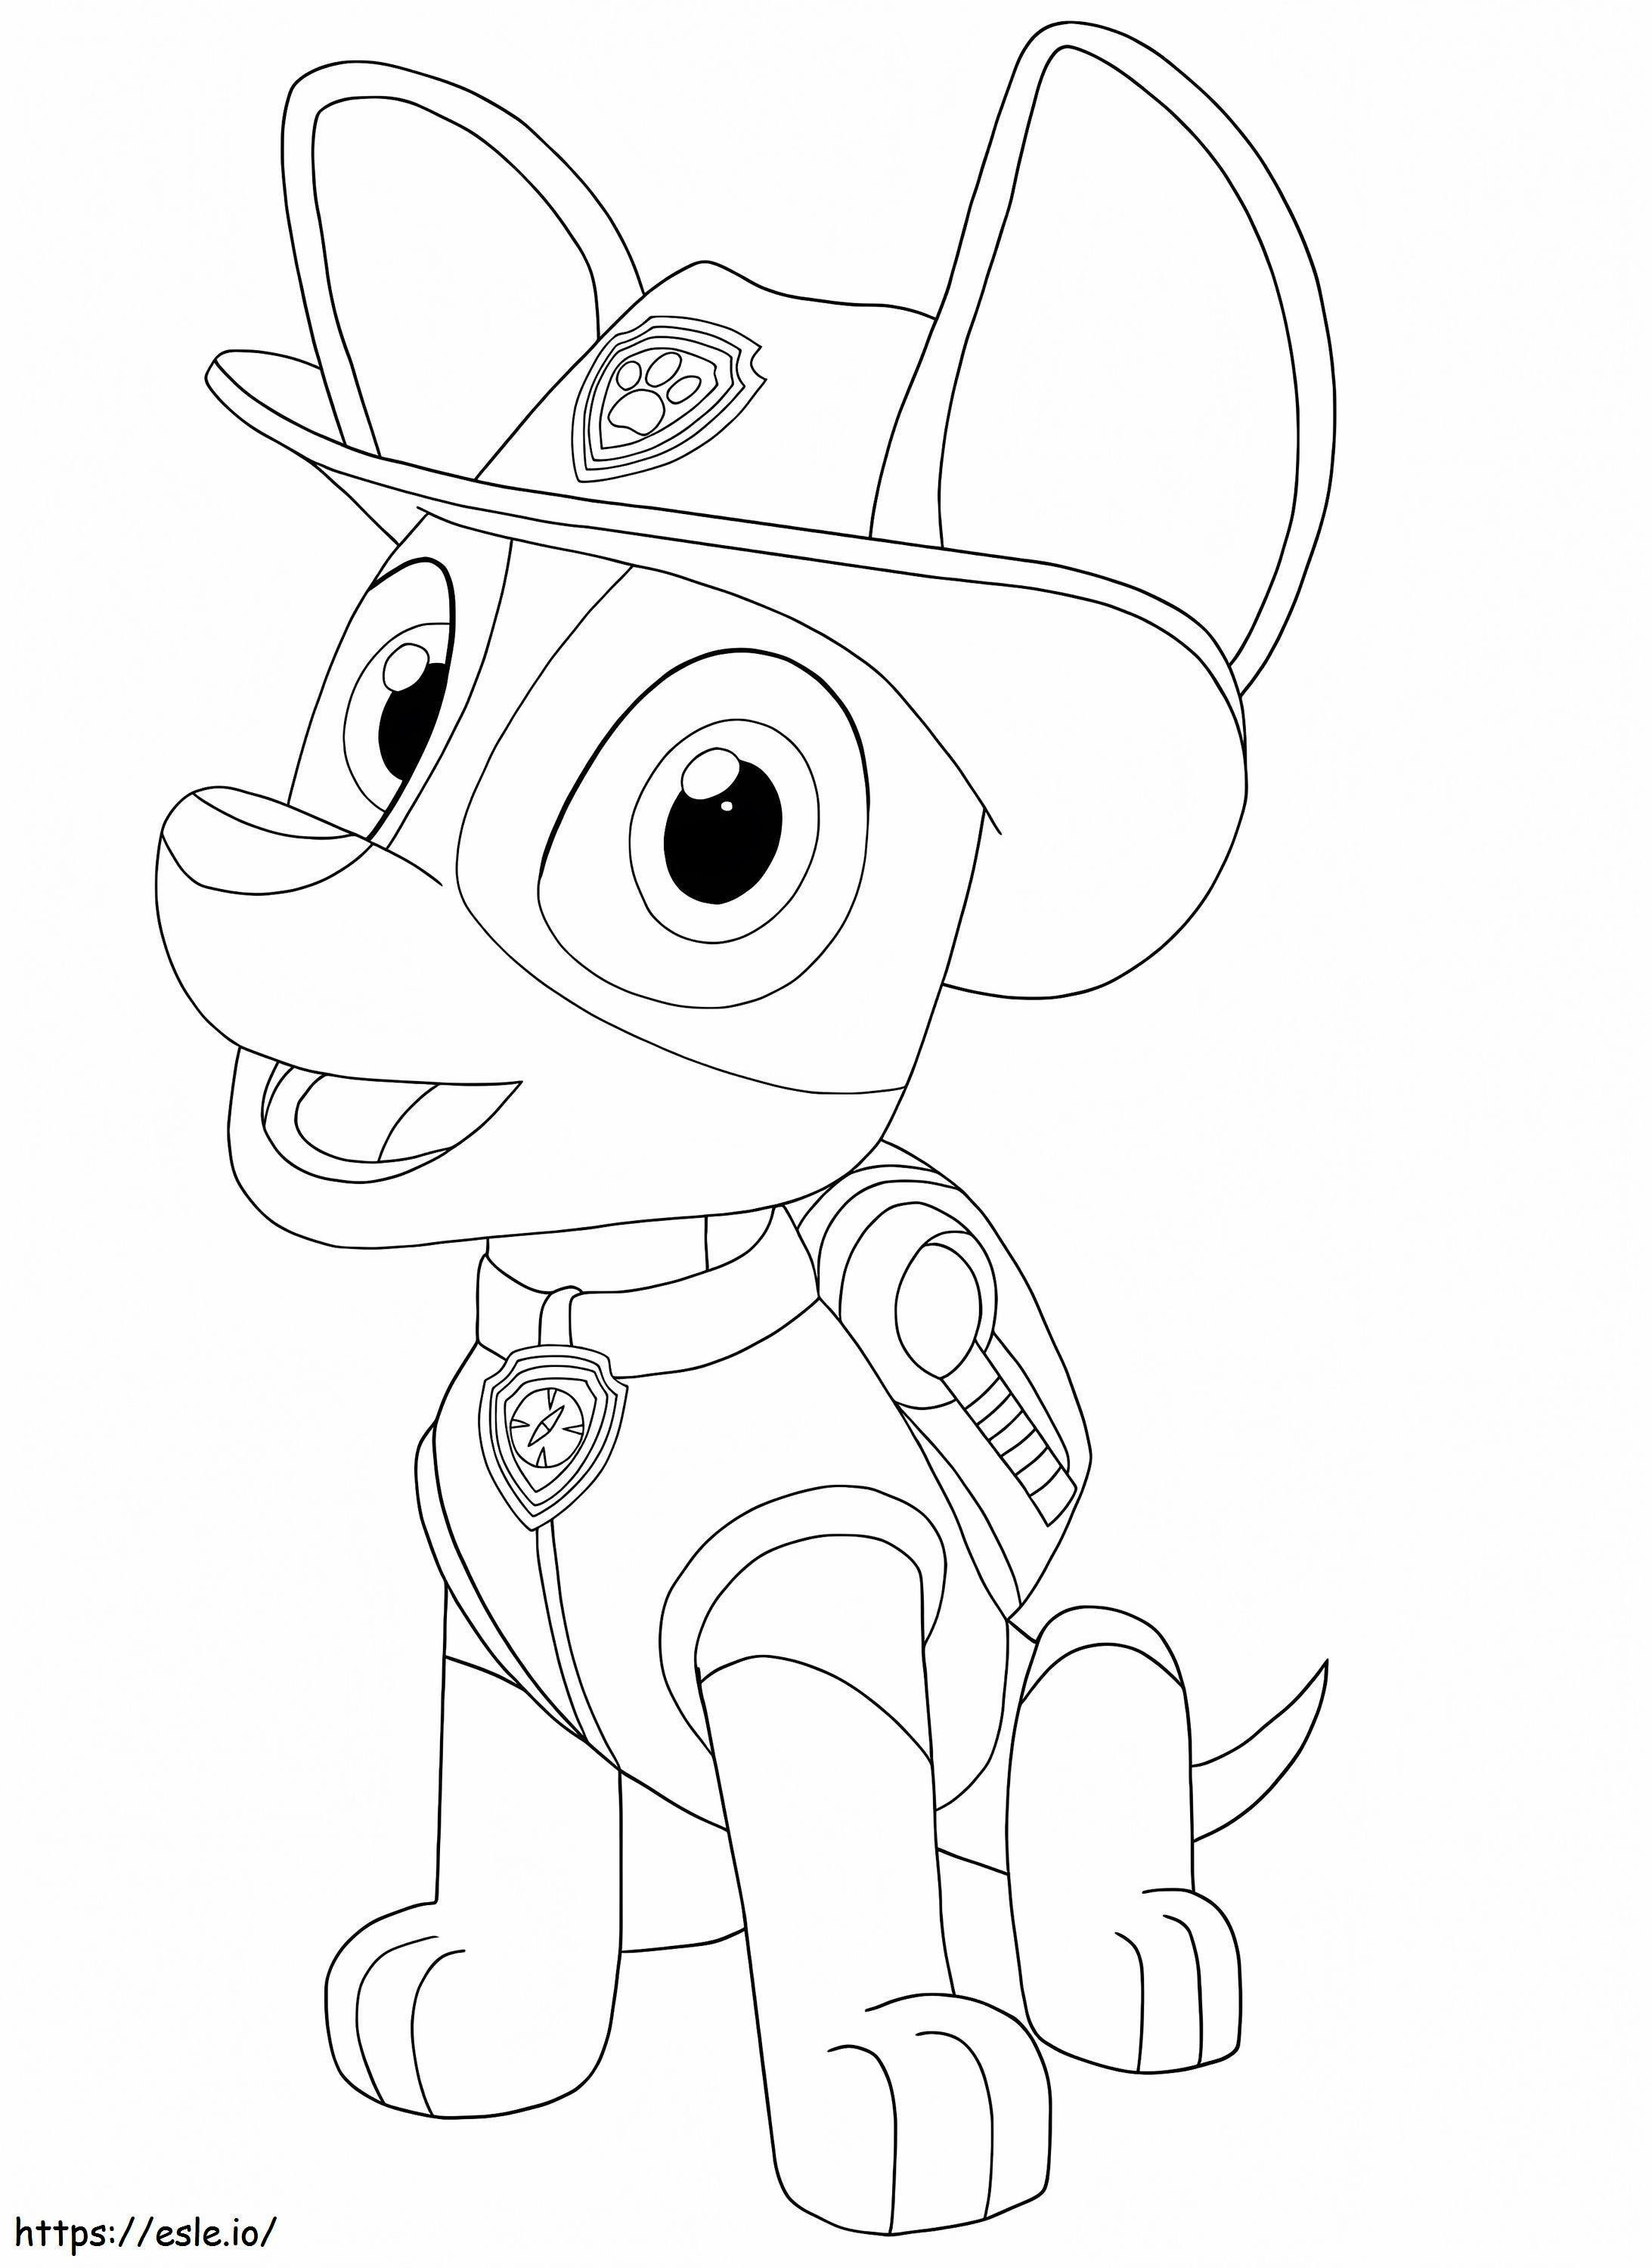 Adorable Tracker coloring page